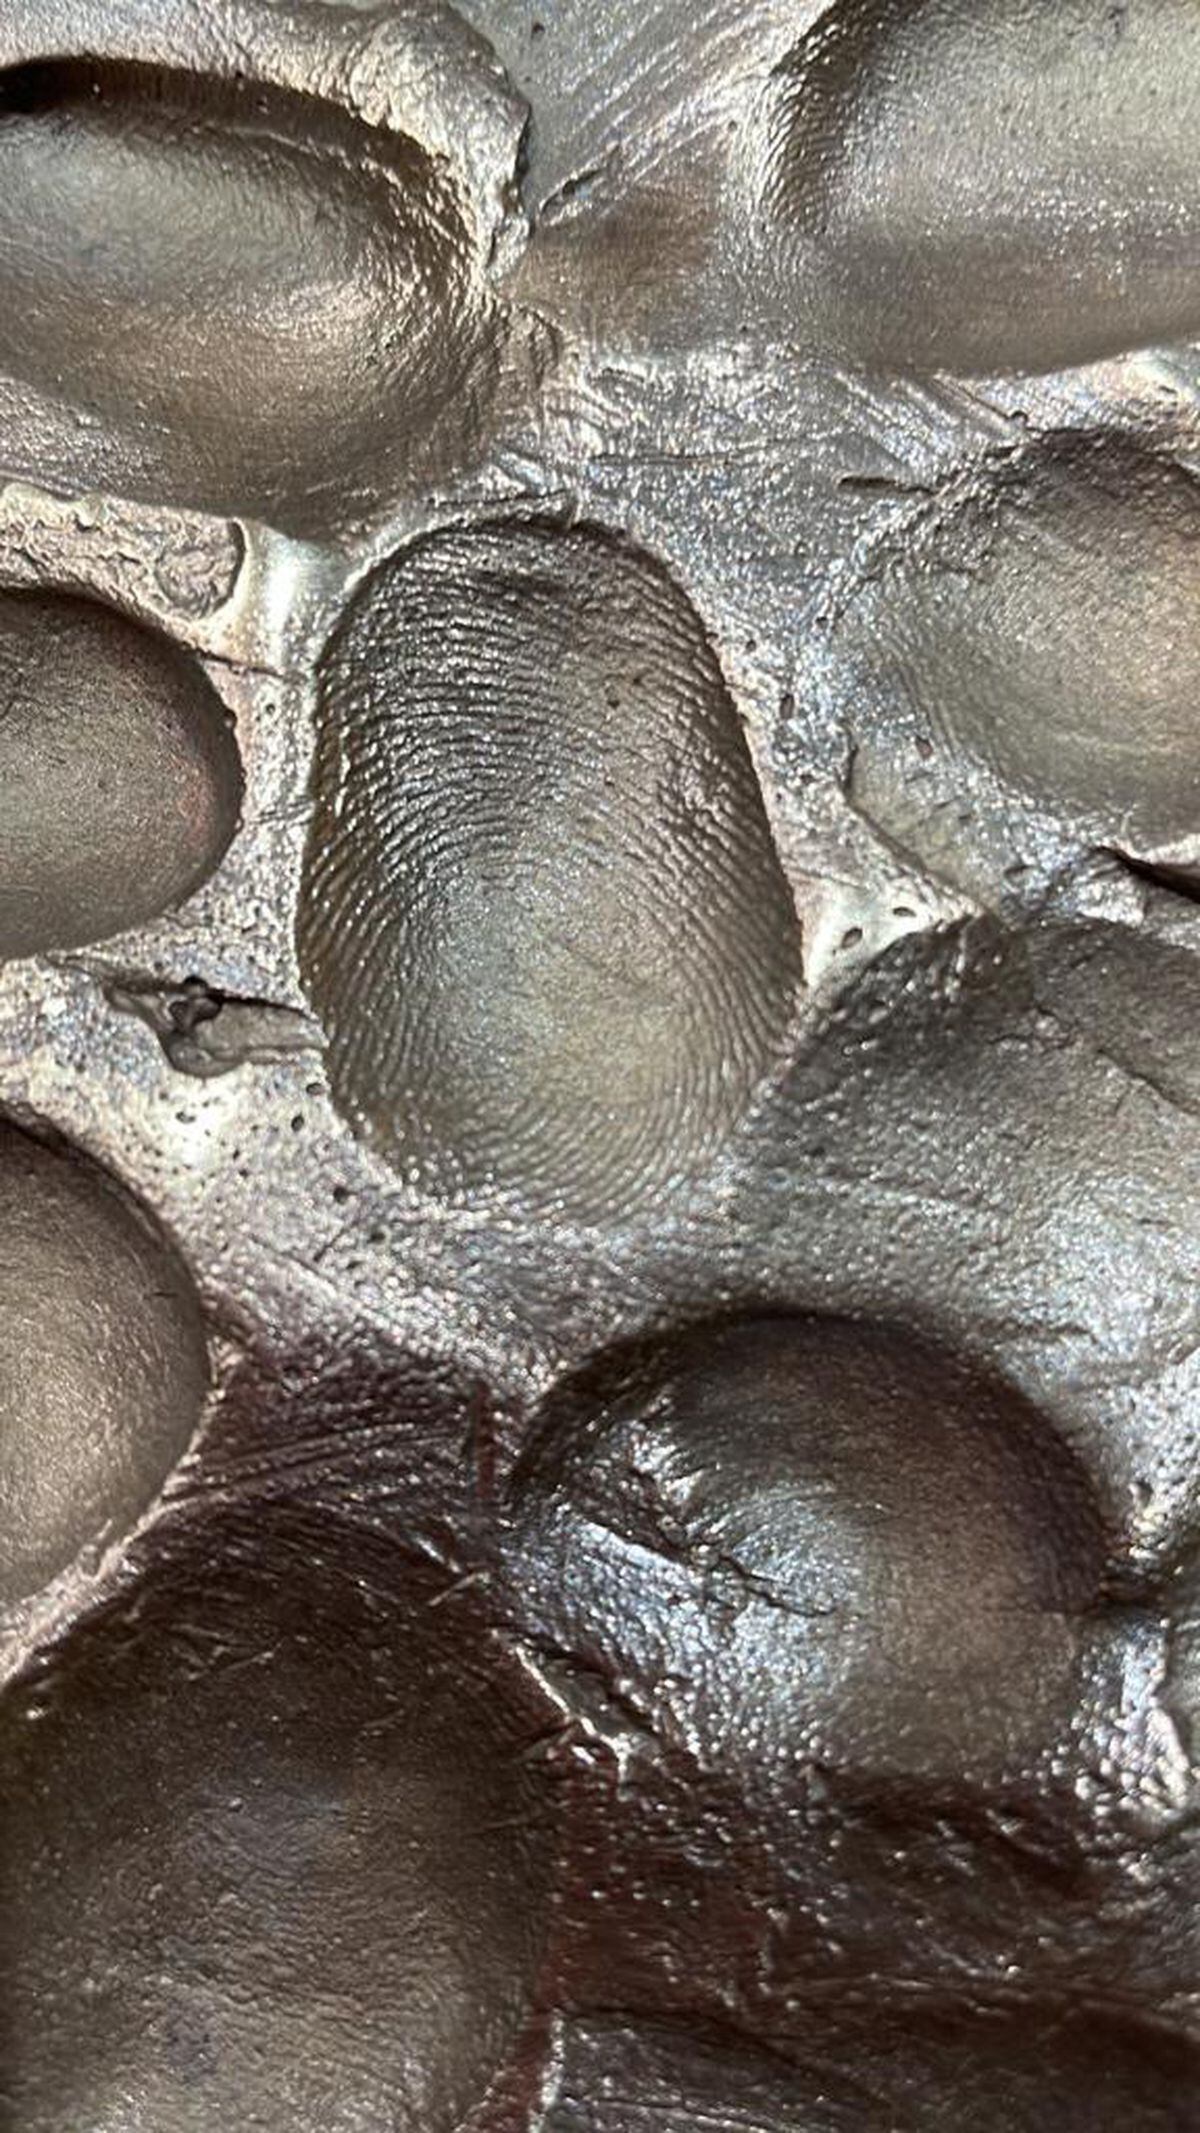 A close-up of the finger prints that feature as part of the sculpture